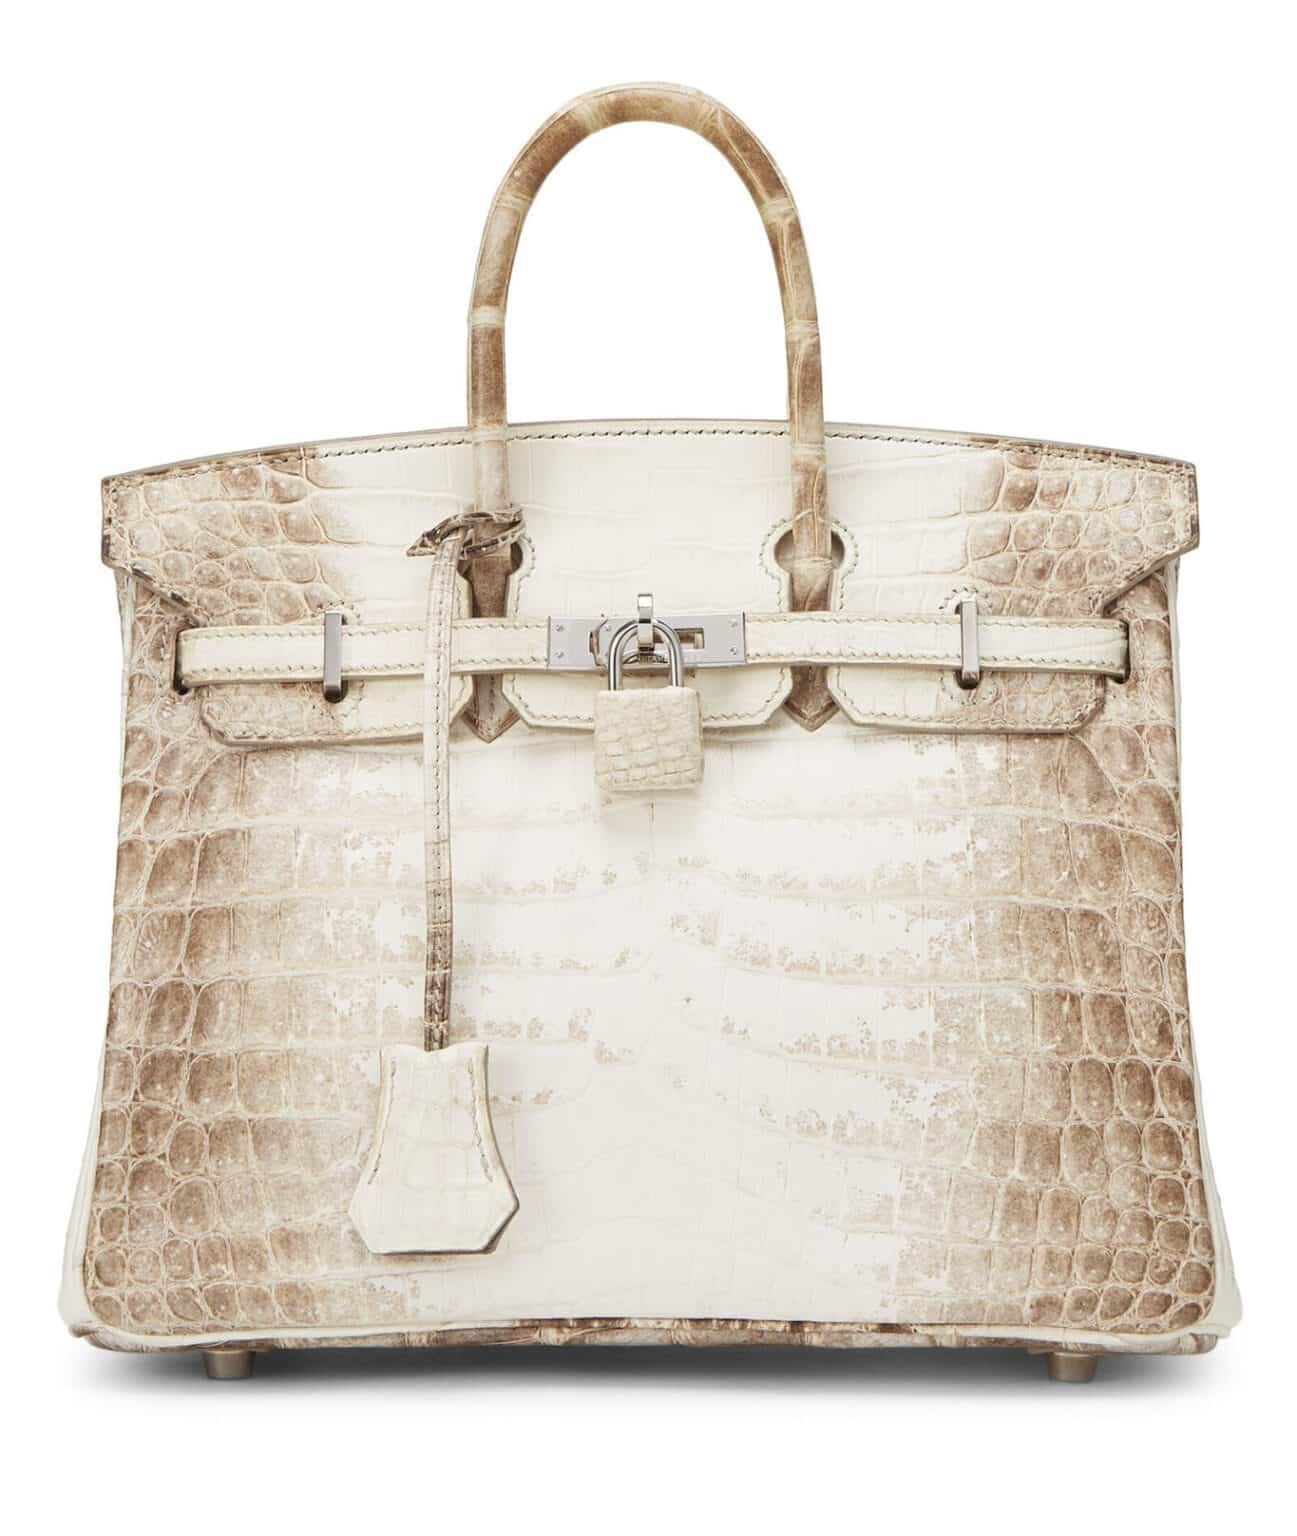 16 of the Best Quiet Luxury Handbags That Are Understated & Stylish